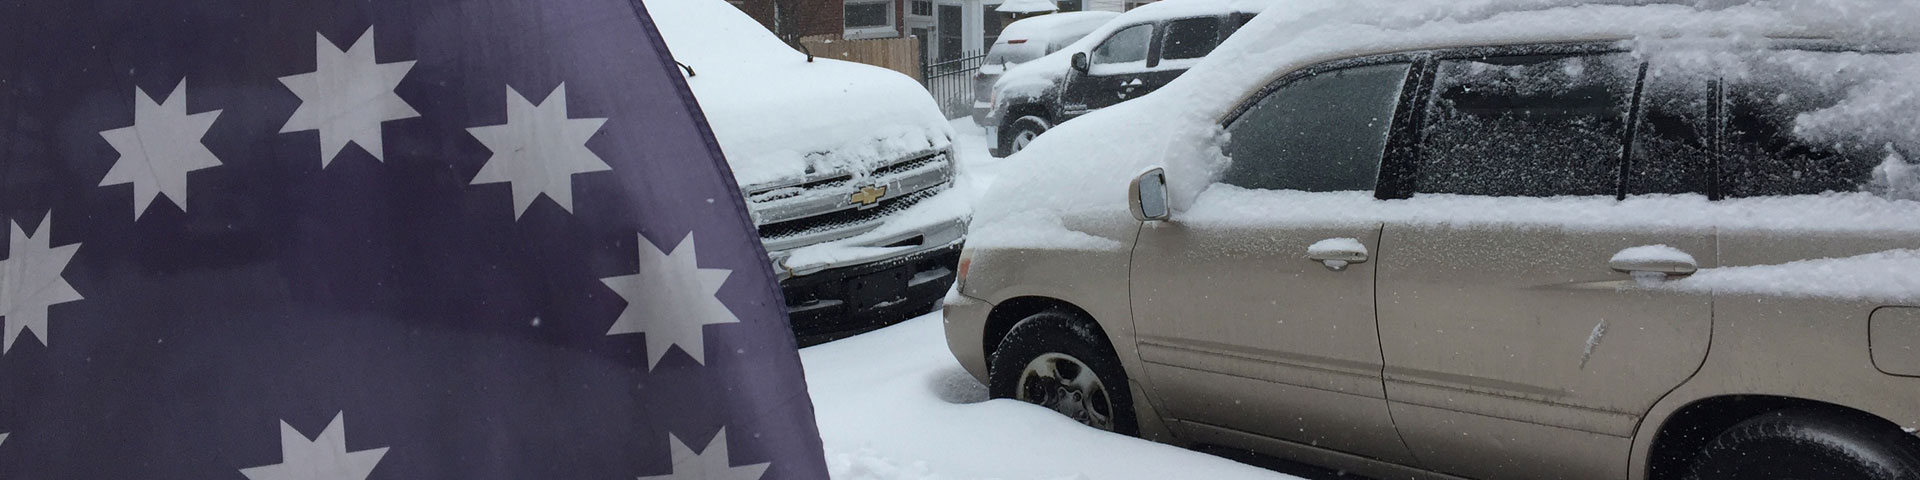 An blue flag with white stars is in the foreground, while snow covered cars appear in the background.